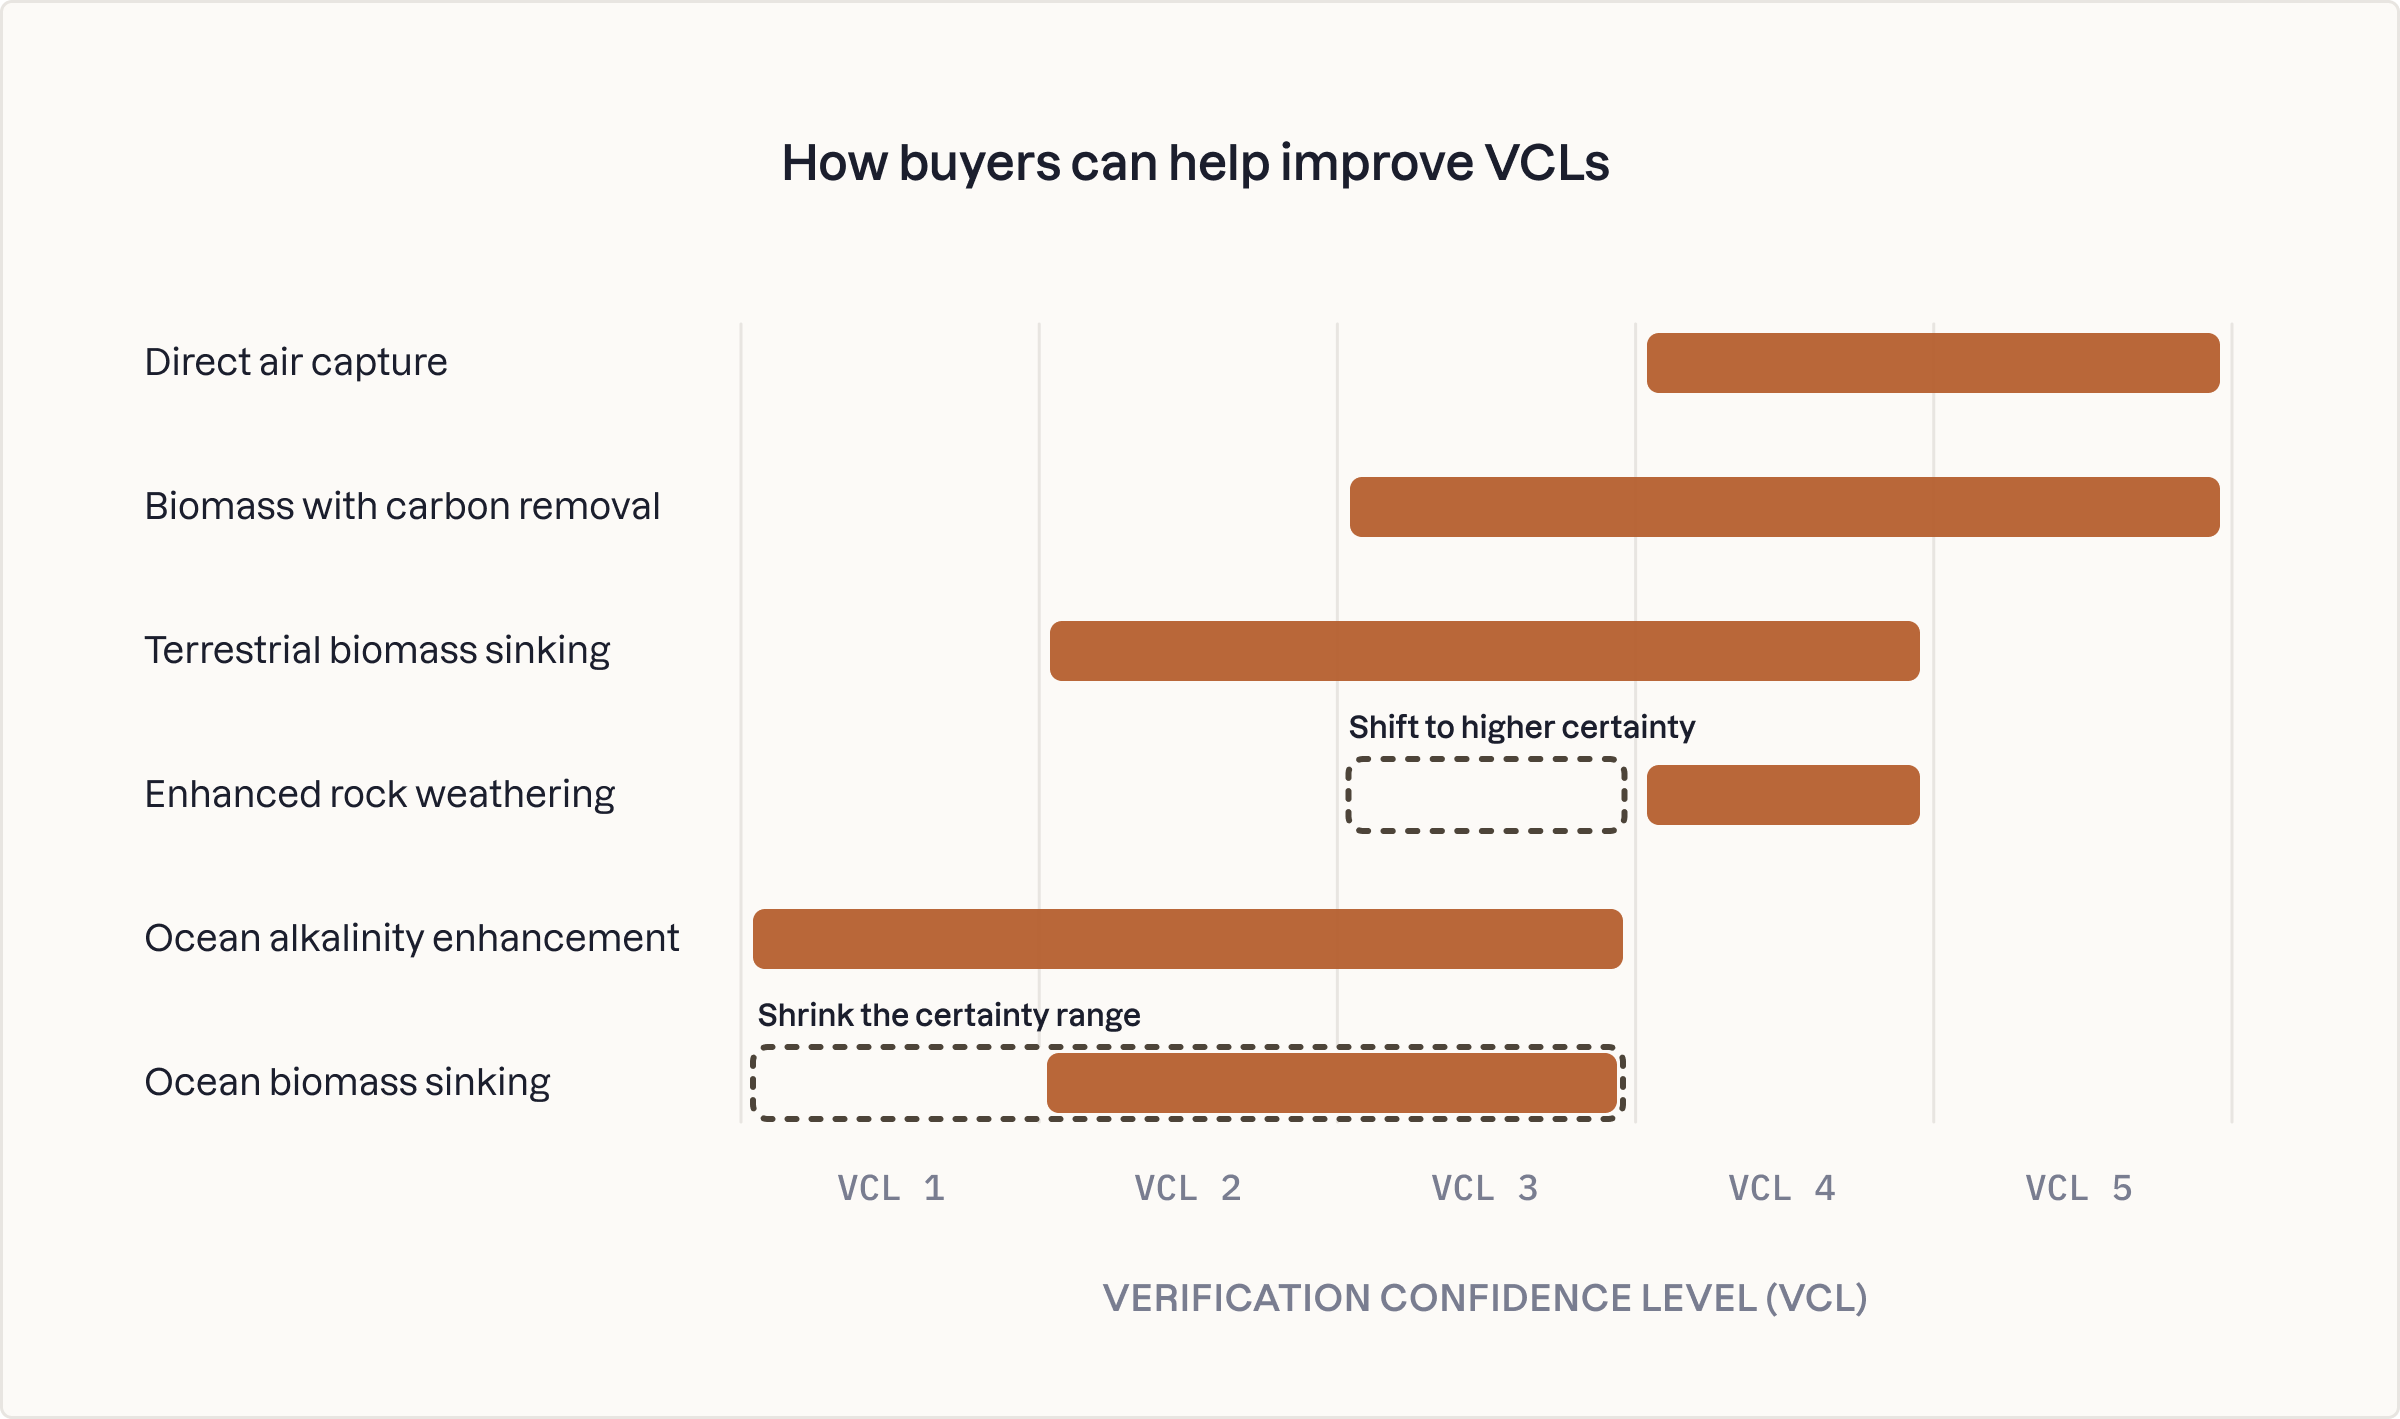 How buyers can help improve VCLs